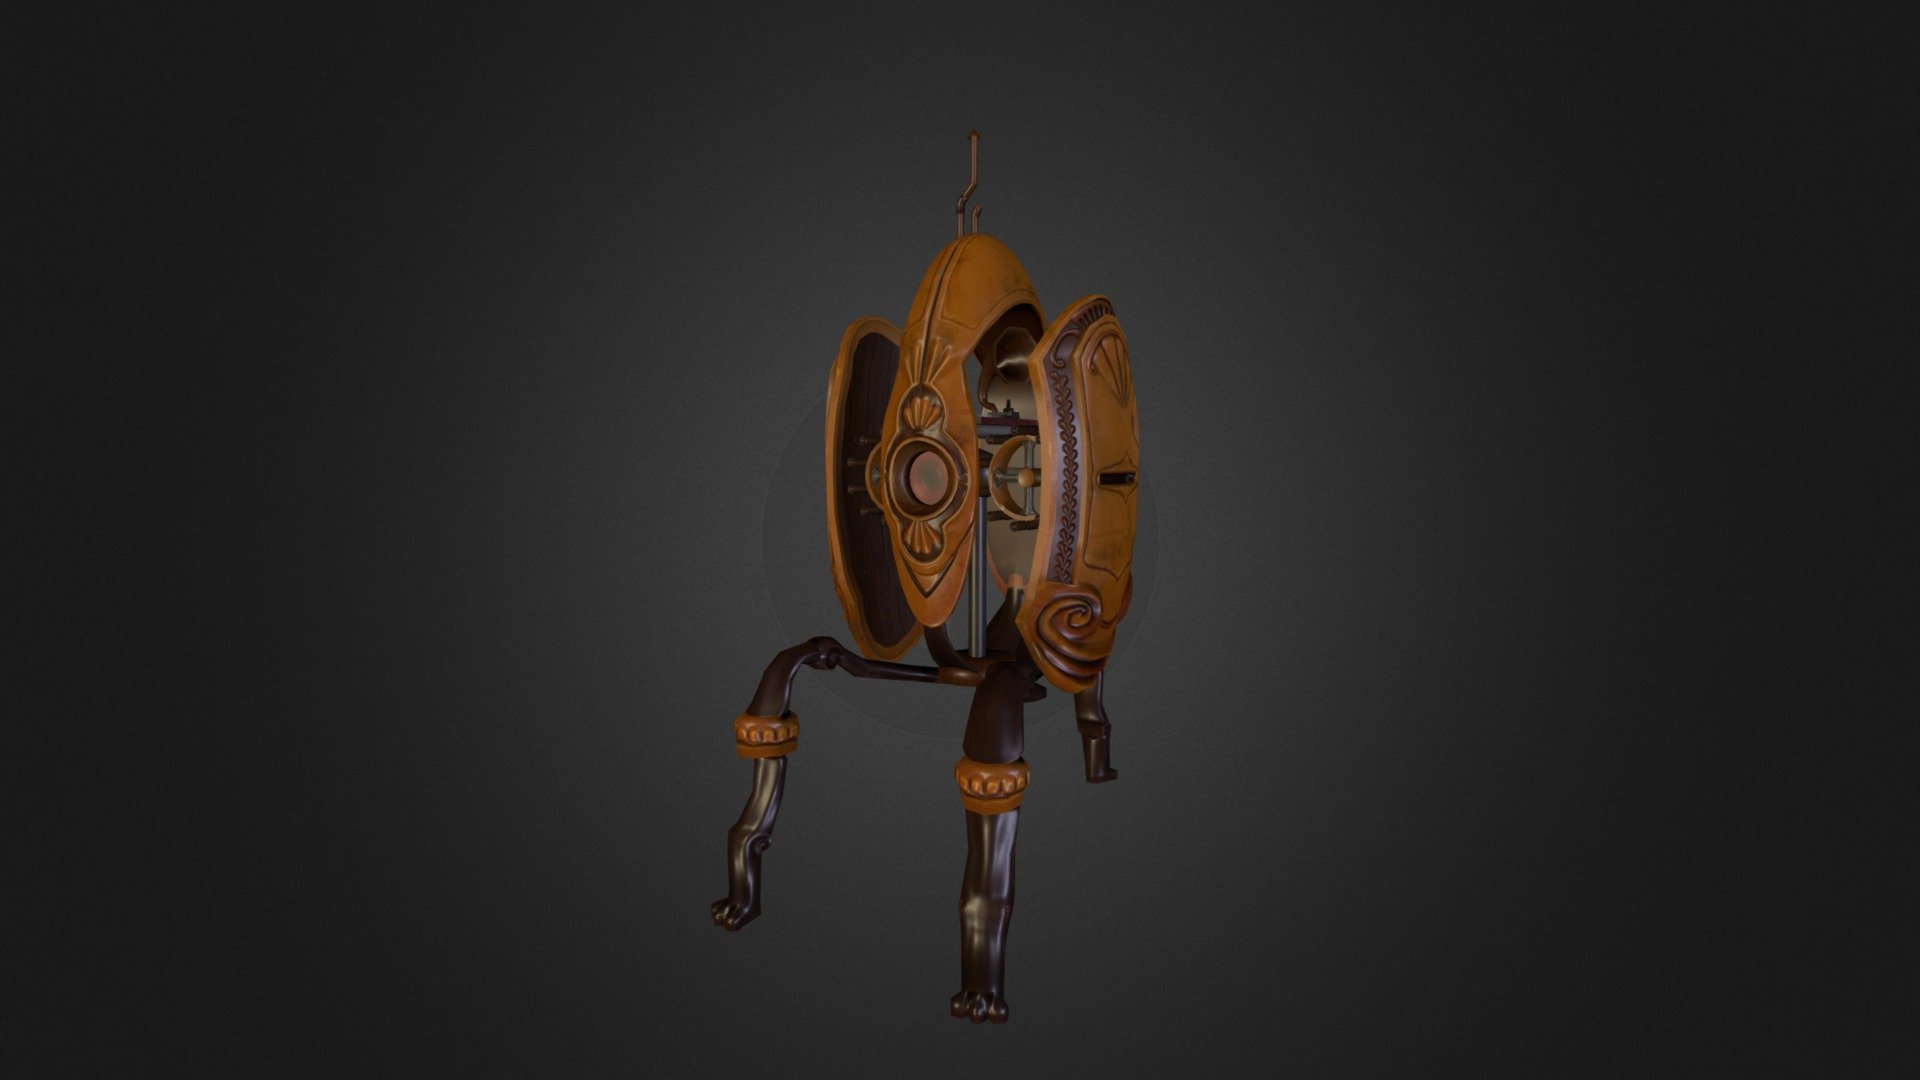 A steampunk version of the portal turret. Orignal concept by Lisa Rye: http://risachantag.deviantart.com

I also hacked/modded it into portal and got a mate to voice act: http://www.youtube.com/watch?v=1ZgJobqj6uQ - Steampunk Portal Turret - 3D model by Abraham Brookes (@Black_Stormy) 3d model